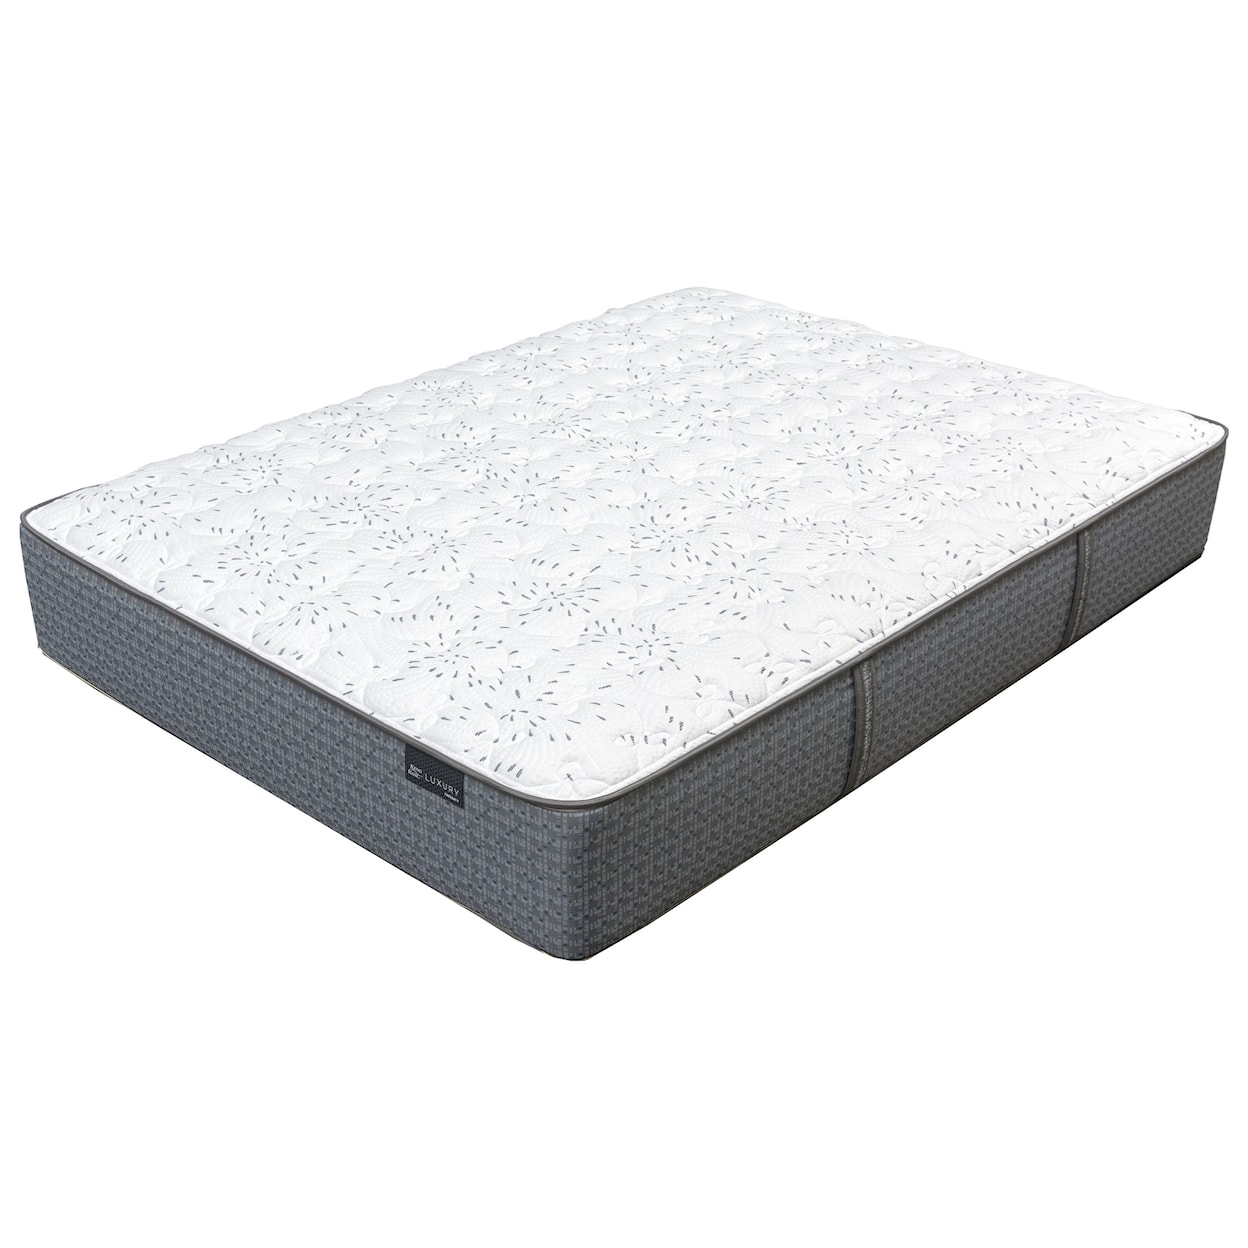 King Koil Pineview XF Twin 12" Extra Firm Mattress